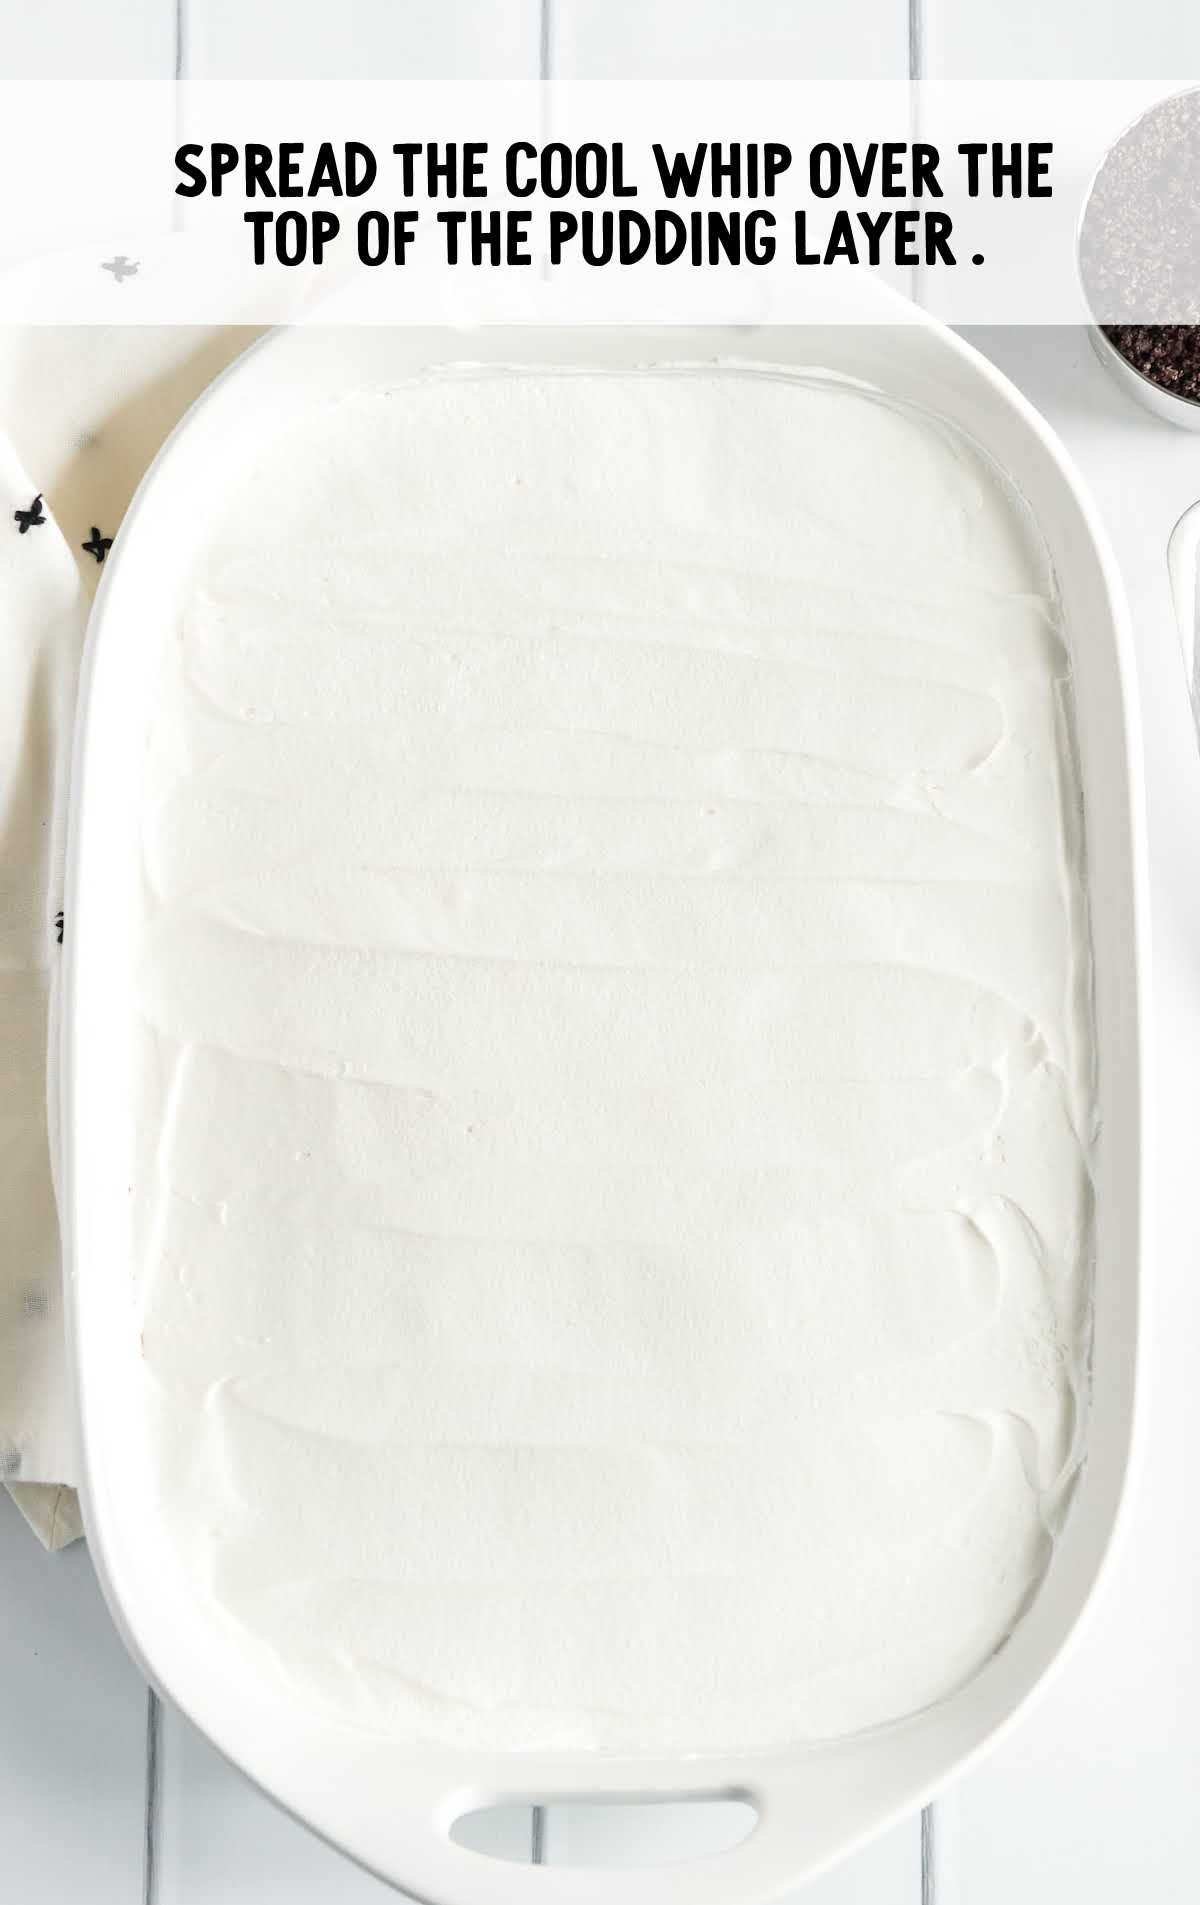 cool whip spread over the top of the pudding layer in a baking dish